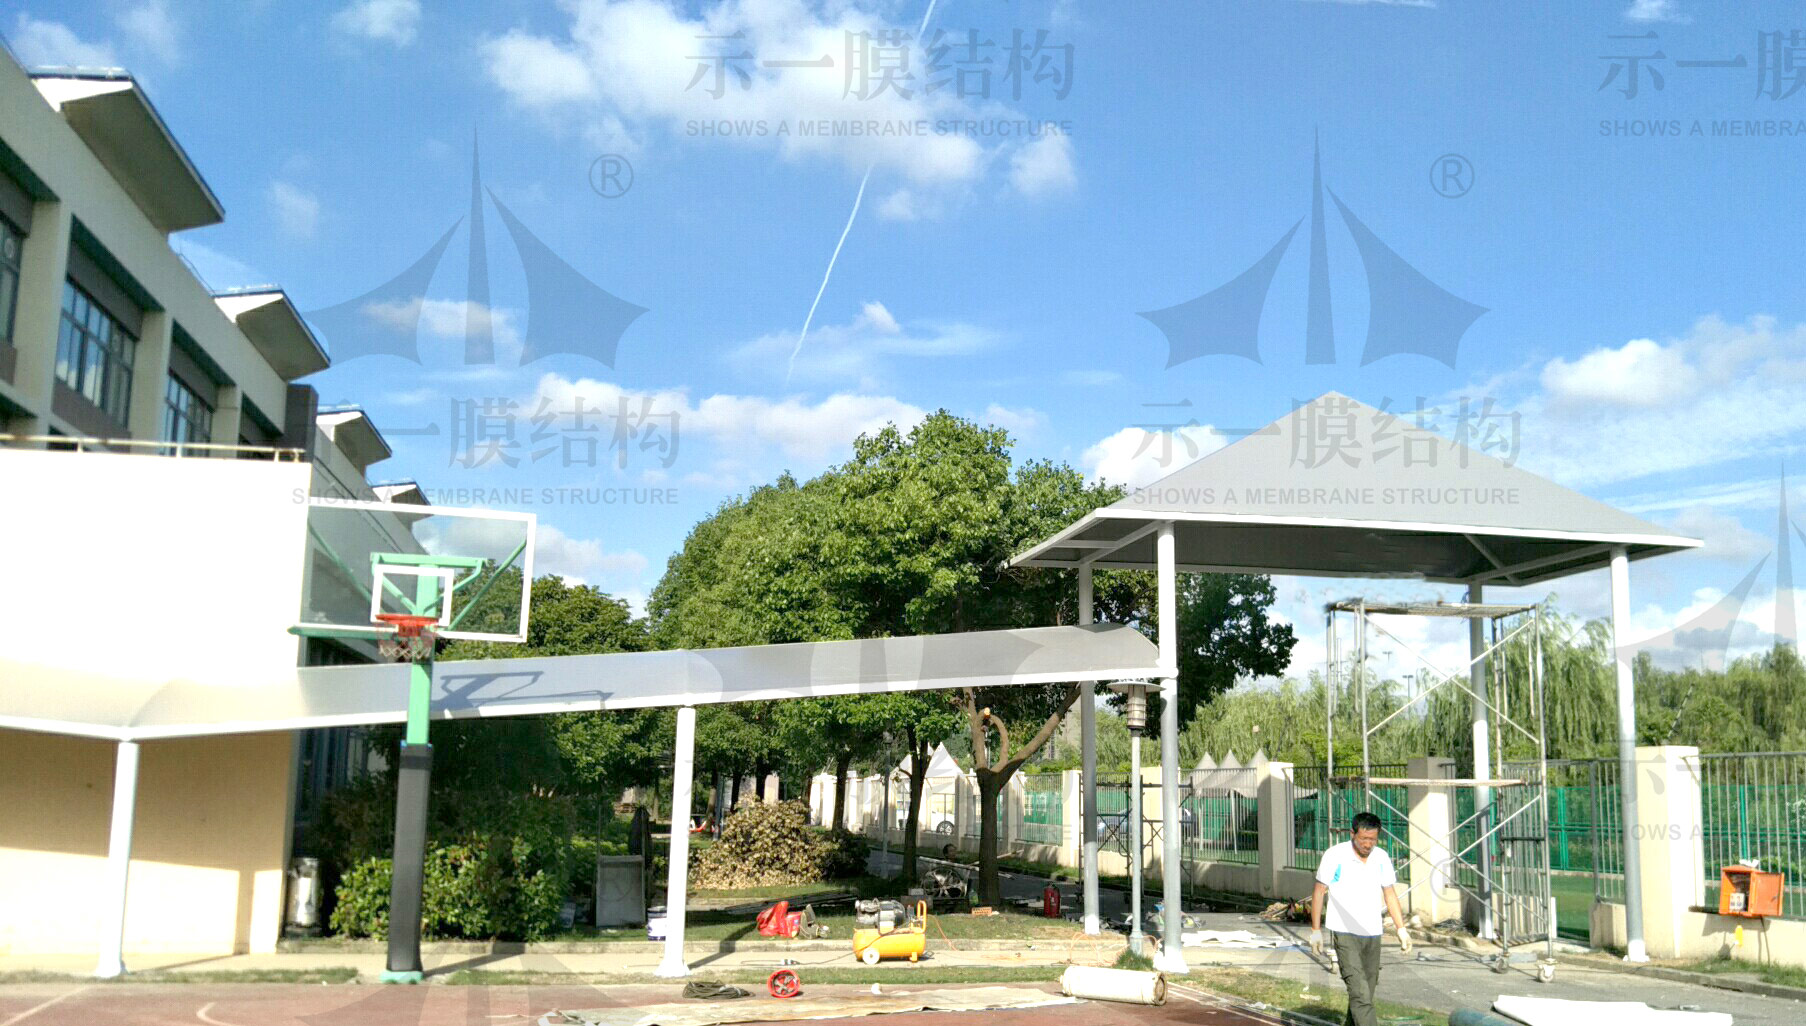 Membrane structure awning for Shanghai British School